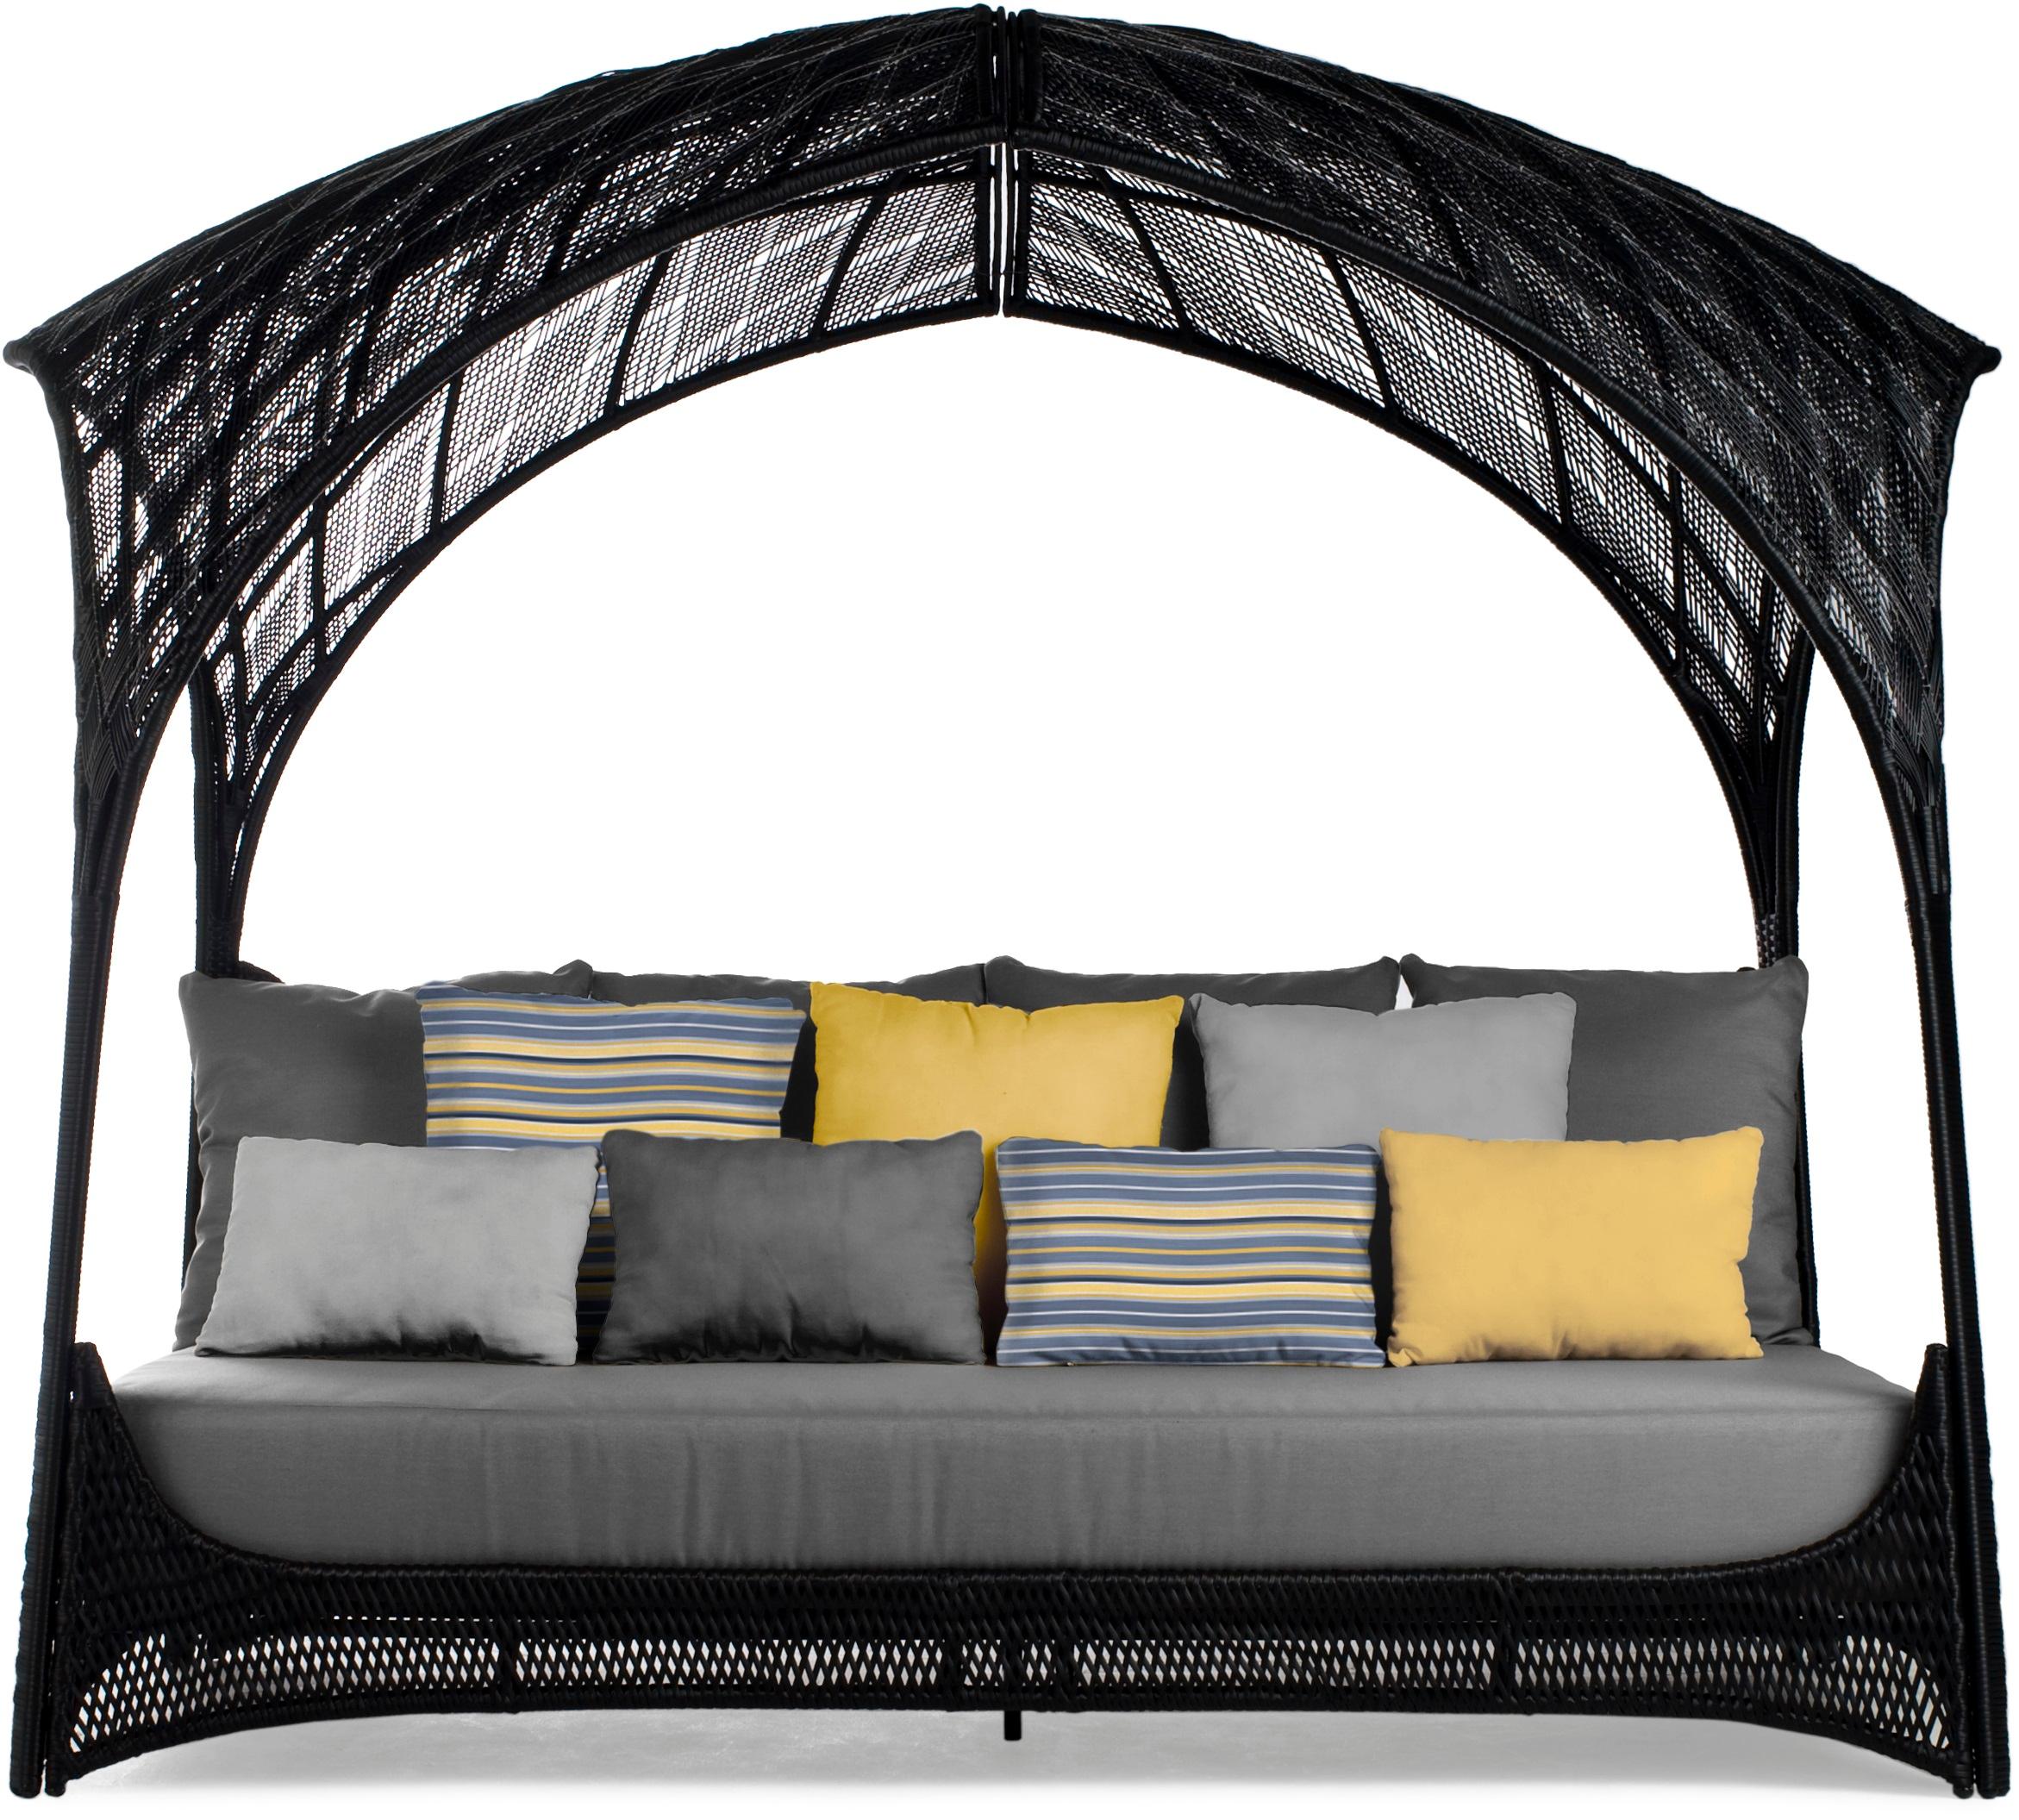 Hagia daybed by Kenneth Cobonpue
Materials: Polyethelene, Nylon. Steel.
Also available in other colors.
Dimensions: 130 cm x 230 cm x H 192cm 

Bask in Hagia’s regal luxury and romantic gothic aesthetic. Beneath an intricately handwoven vaulted